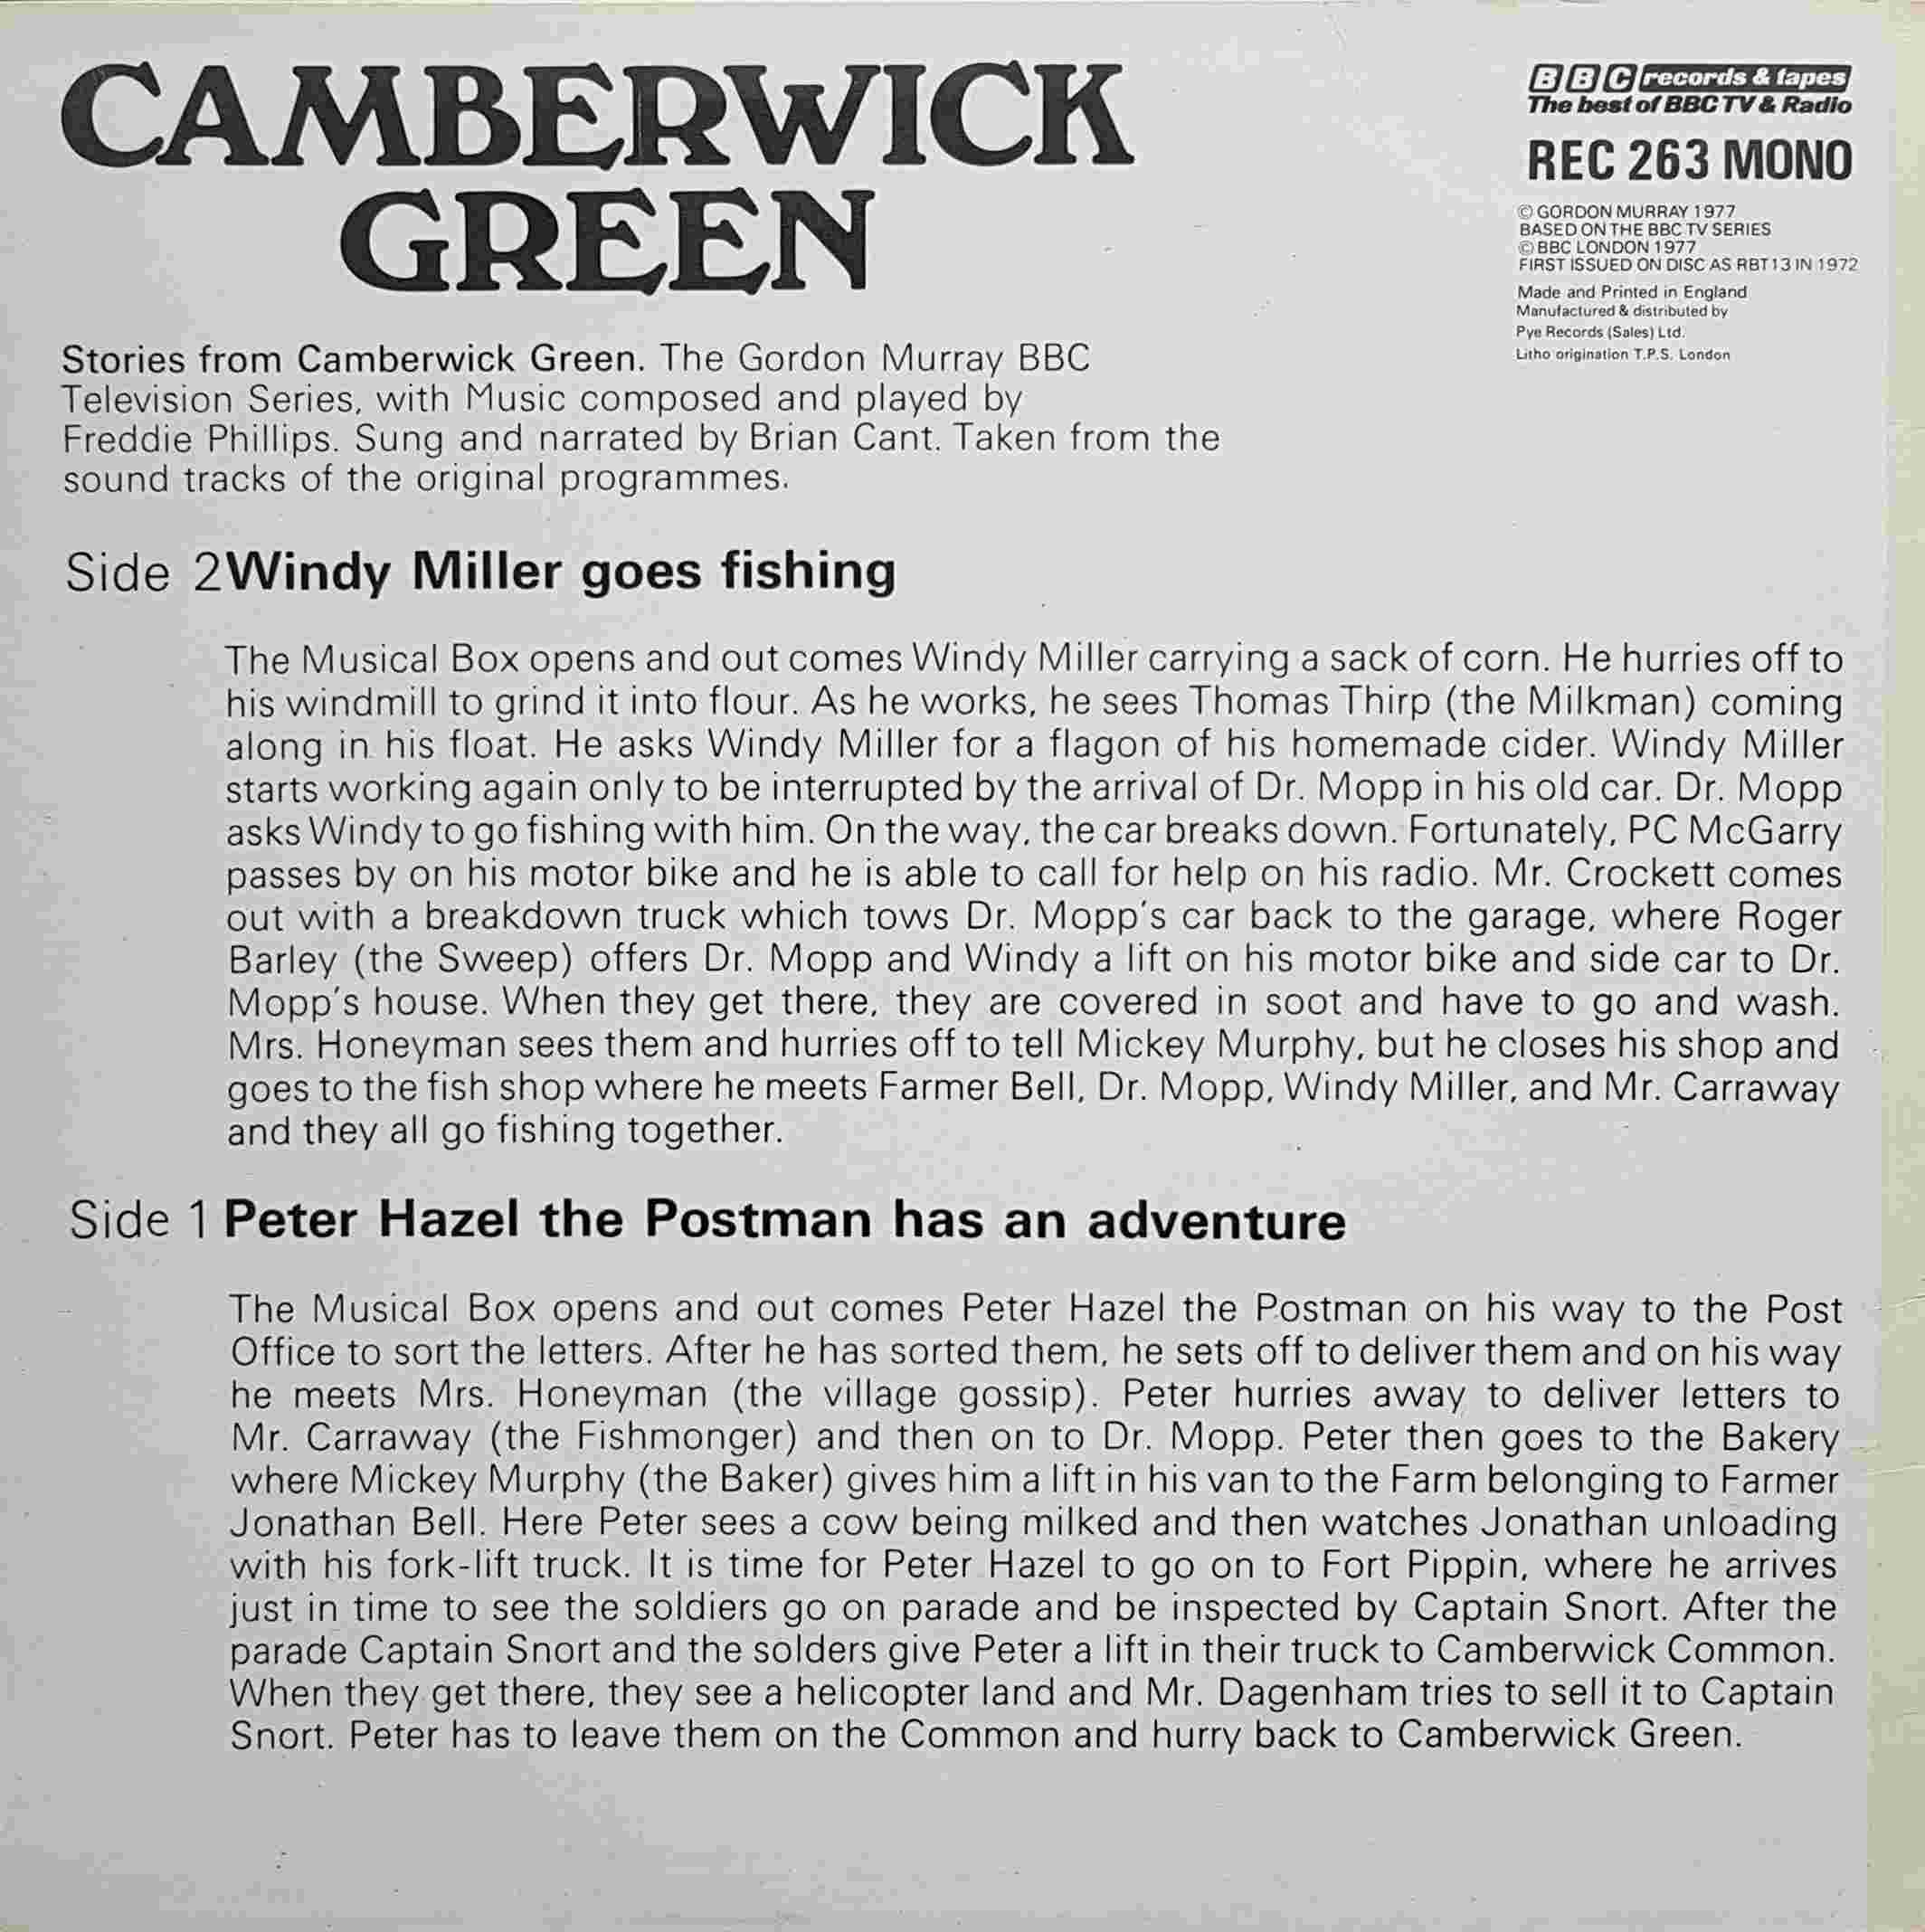 Picture of REC 263 Camberwick Green by artist Brian Cant / Freddie Phillips from the BBC records and Tapes library